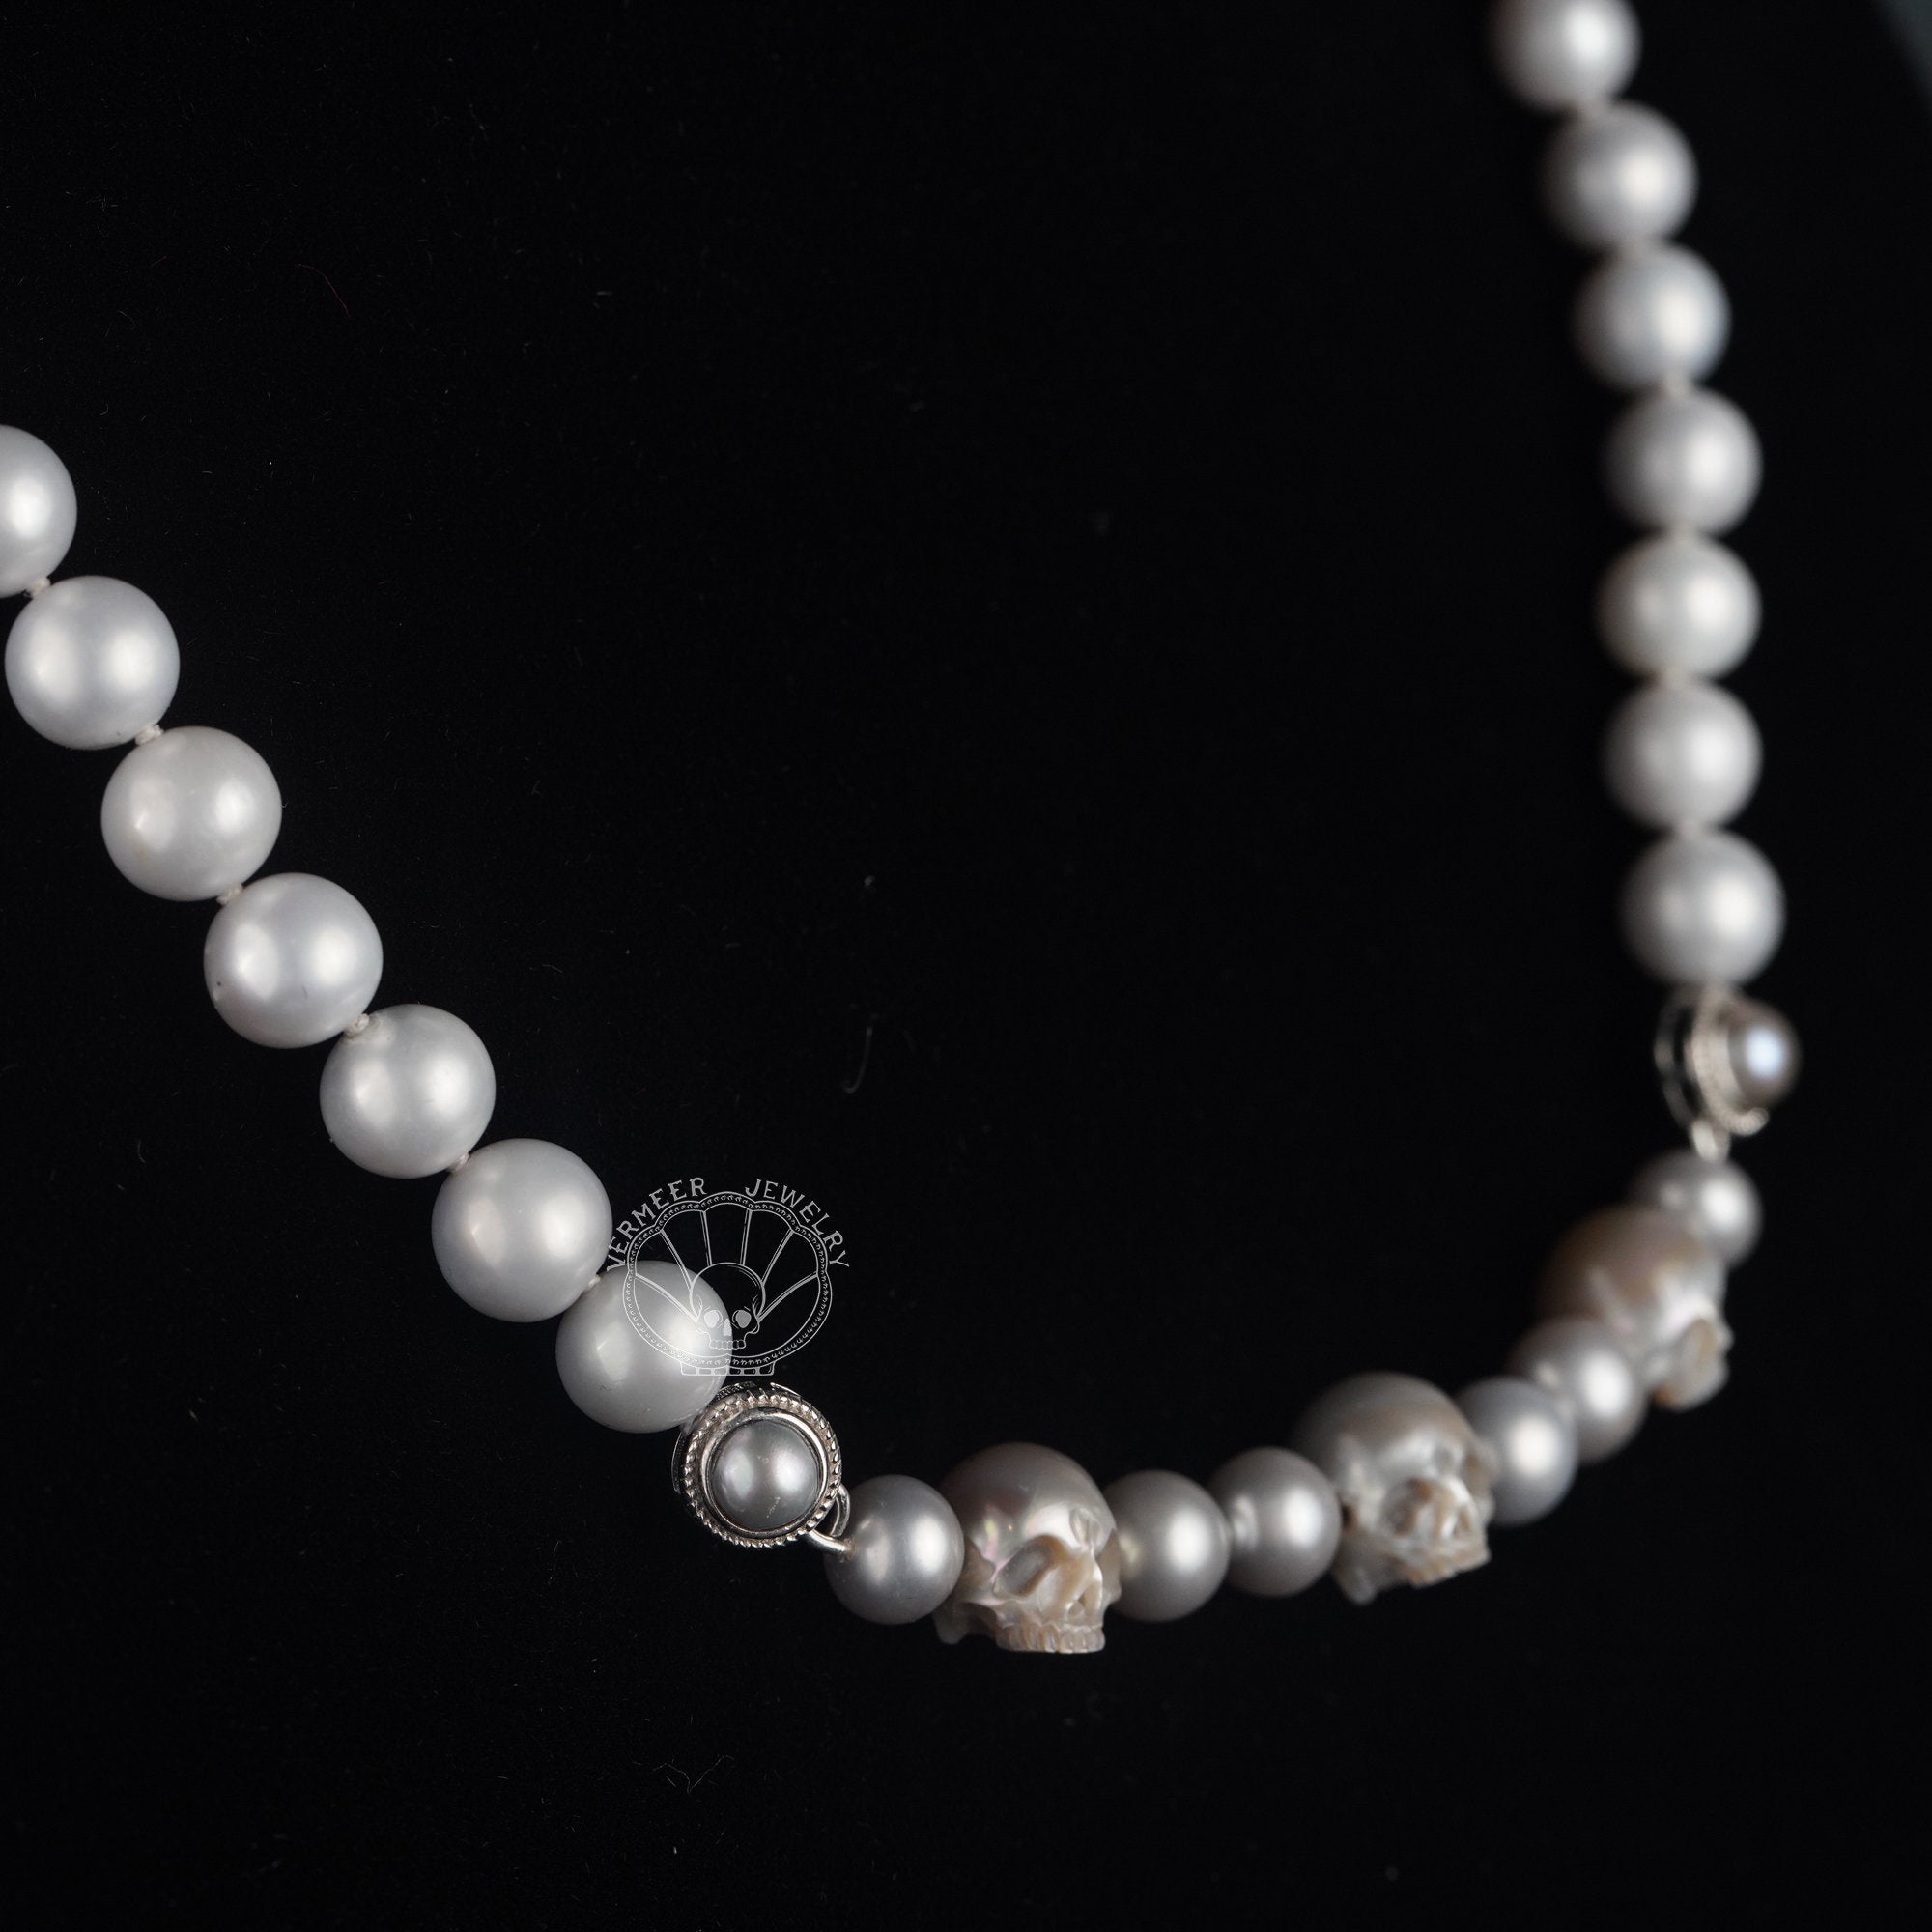 wedding necklace skull carved pearl necklace special offer price